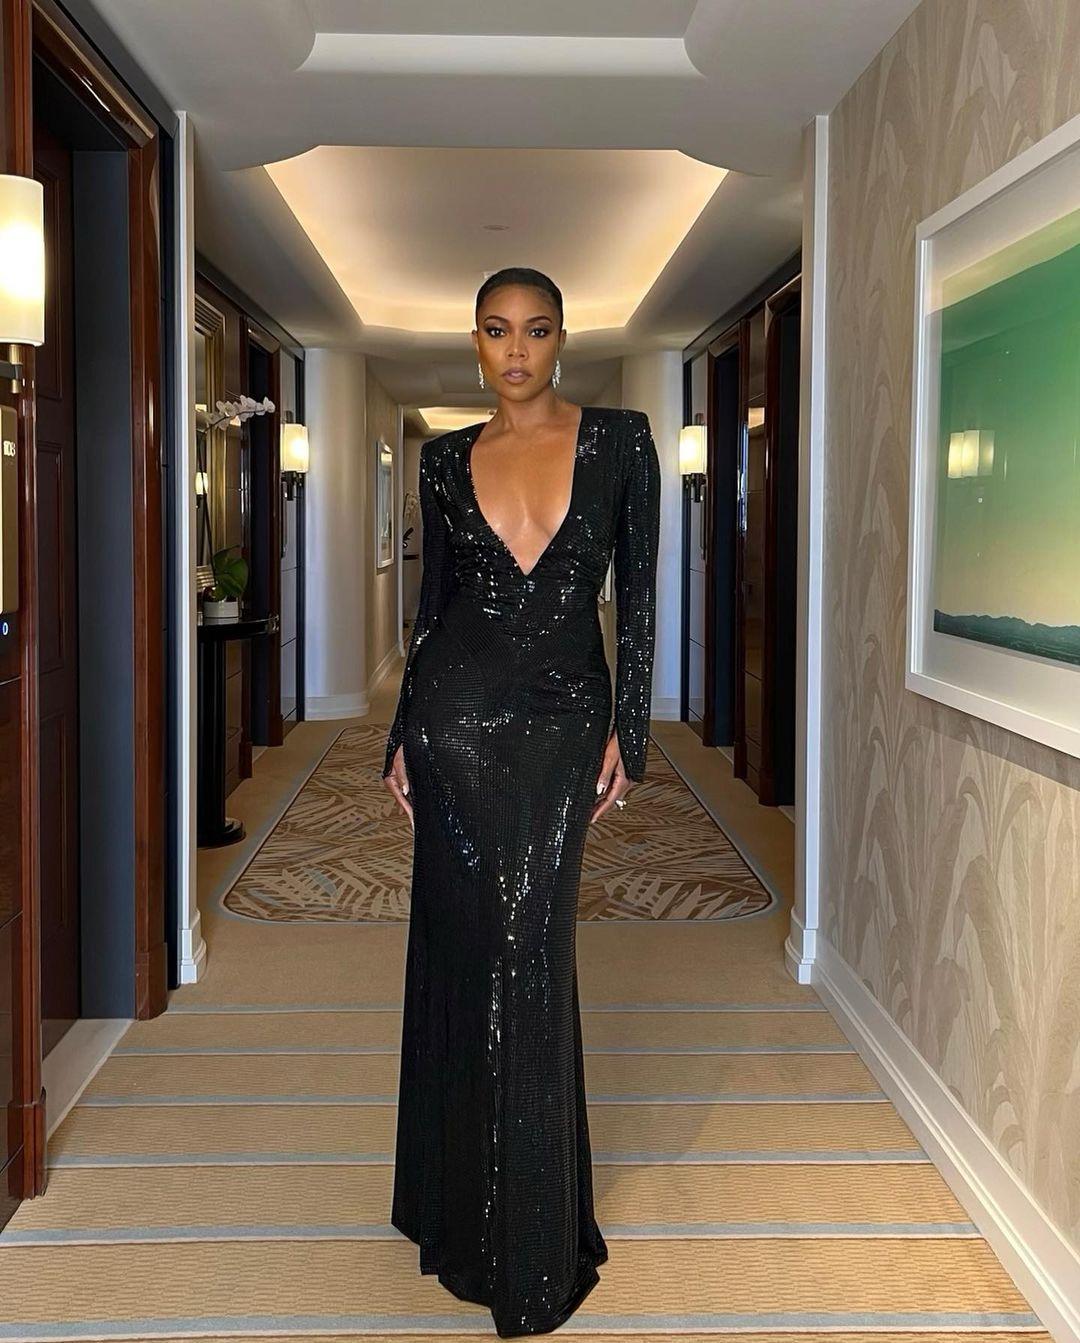 Gabrielle Union Redefines Excellence To 'Black On Black' As She Struts In Sparkling Dress